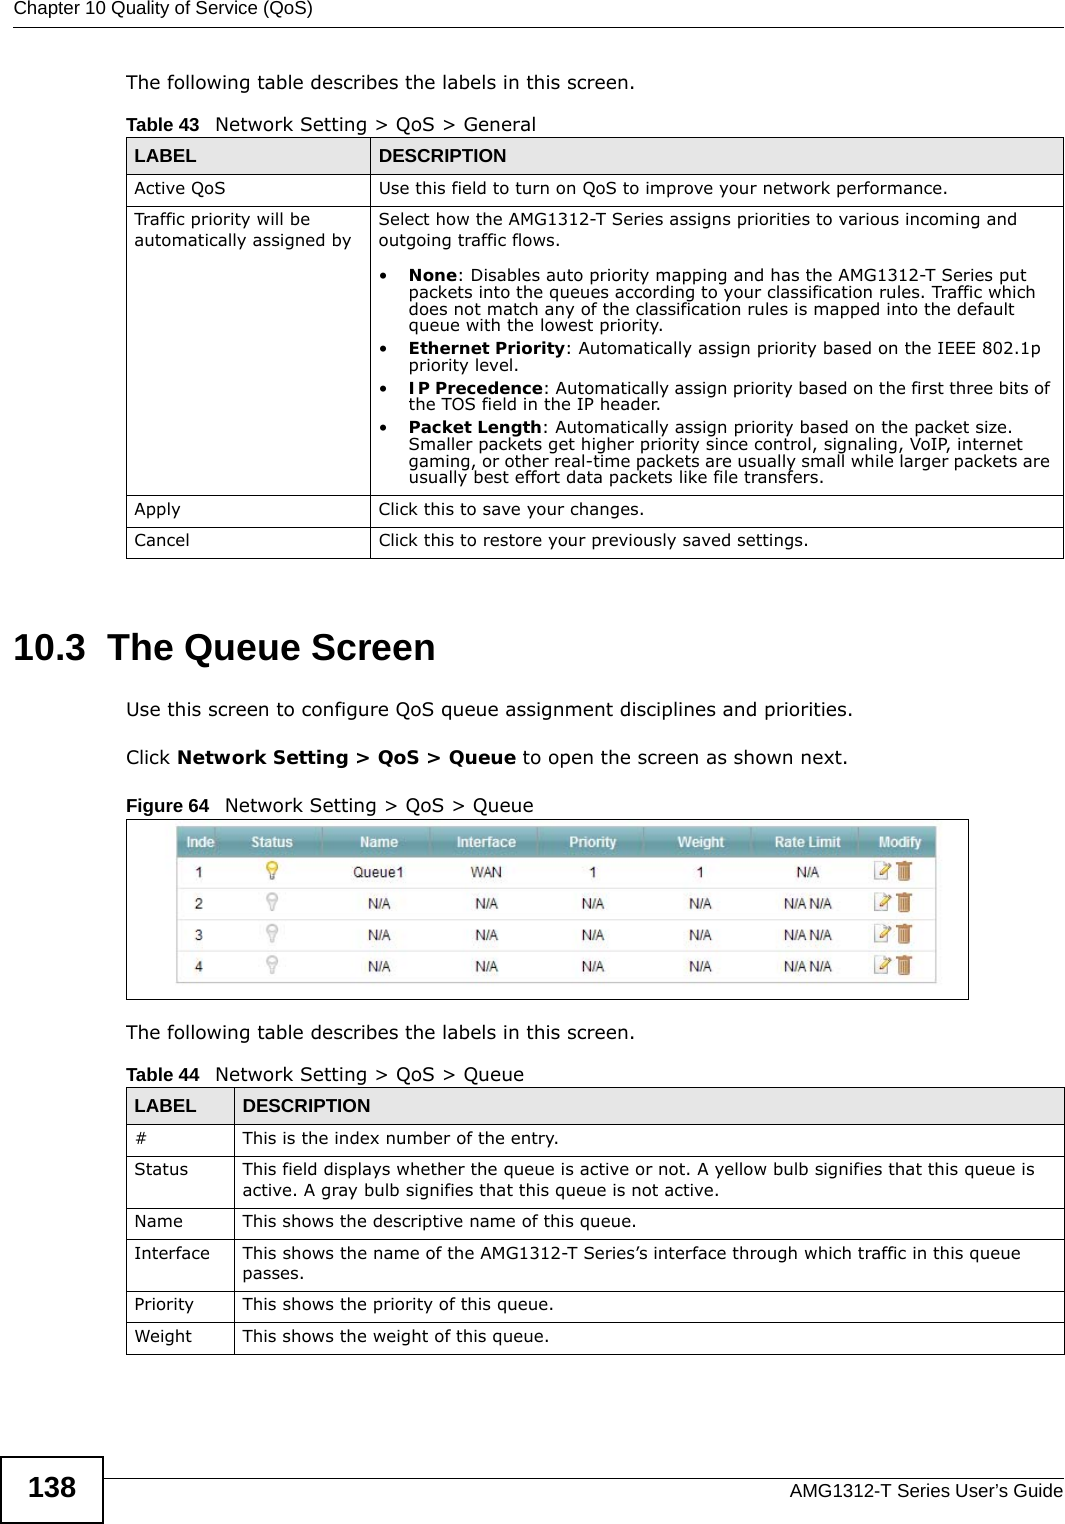 Chapter 10 Quality of Service (QoS)AMG1312-T Series User’s Guide138The following table describes the labels in this screen. 10.3  The Queue ScreenUse this screen to configure QoS queue assignment disciplines and priorities.Click Network Setting &gt; QoS &gt; Queue to open the screen as shown next.Figure 64   Network Setting &gt; QoS &gt; QueueThe following table describes the labels in this screen. Table 43   Network Setting &gt; QoS &gt; GeneralLABEL DESCRIPTIONActive QoS Use this field to turn on QoS to improve your network performance.Traffic priority will be automatically assigned by Select how the AMG1312-T Series assigns priorities to various incoming and outgoing traffic flows.•None: Disables auto priority mapping and has the AMG1312-T Series put packets into the queues according to your classification rules. Traffic which does not match any of the classification rules is mapped into the default queue with the lowest priority.•Ethernet Priority: Automatically assign priority based on the IEEE 802.1p priority level.•IP Precedence: Automatically assign priority based on the first three bits of the TOS field in the IP header.•Packet Length: Automatically assign priority based on the packet size. Smaller packets get higher priority since control, signaling, VoIP, internet gaming, or other real-time packets are usually small while larger packets are usually best effort data packets like file transfers.Apply Click this to save your changes.Cancel Click this to restore your previously saved settings.Table 44   Network Setting &gt; QoS &gt; QueueLABEL DESCRIPTION#This is the index number of the entry.Status This field displays whether the queue is active or not. A yellow bulb signifies that this queue is active. A gray bulb signifies that this queue is not active.Name This shows the descriptive name of this queue.Interface This shows the name of the AMG1312-T Series’s interface through which traffic in this queue passes.Priority This shows the priority of this queue.Weight This shows the weight of this queue.